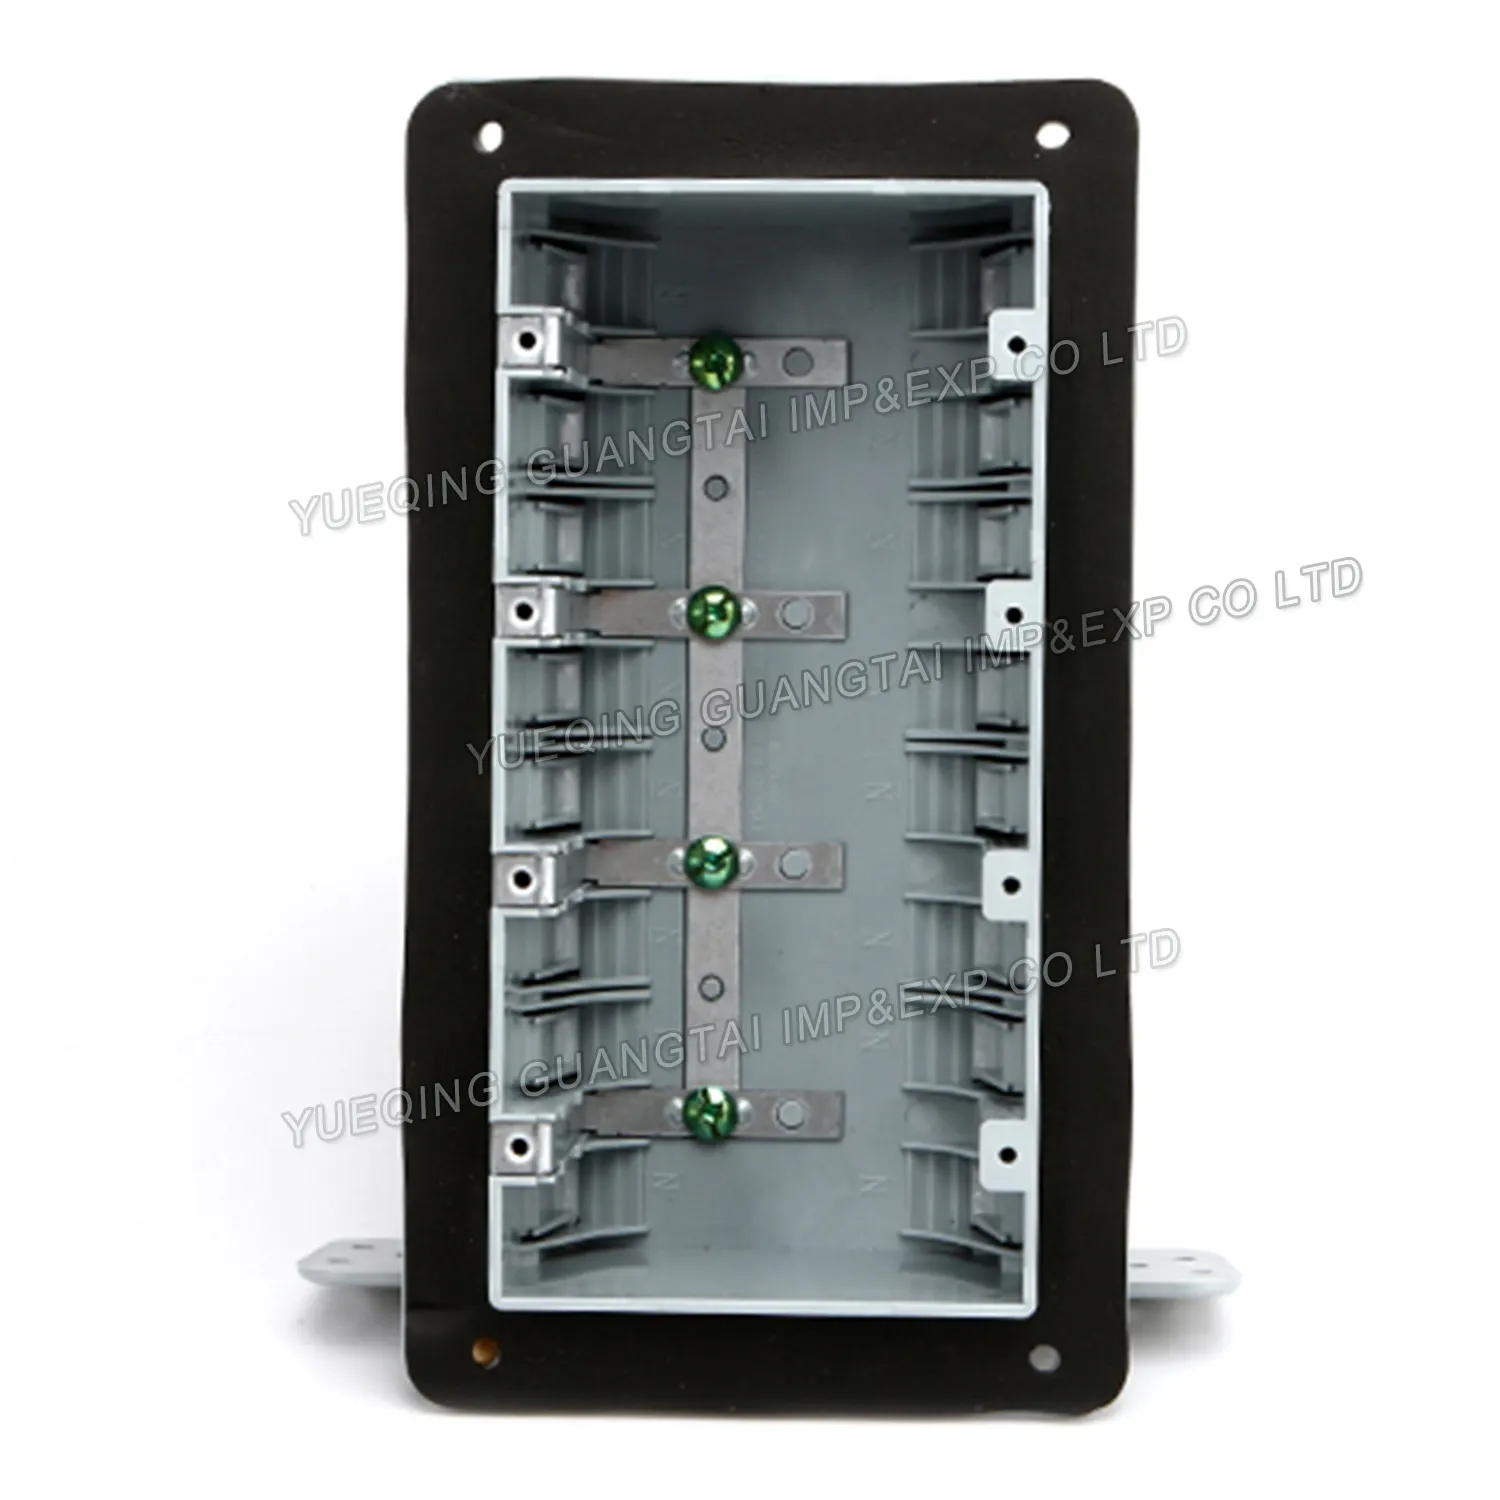 4 gang switch plastic ABS material waterproof wiring box